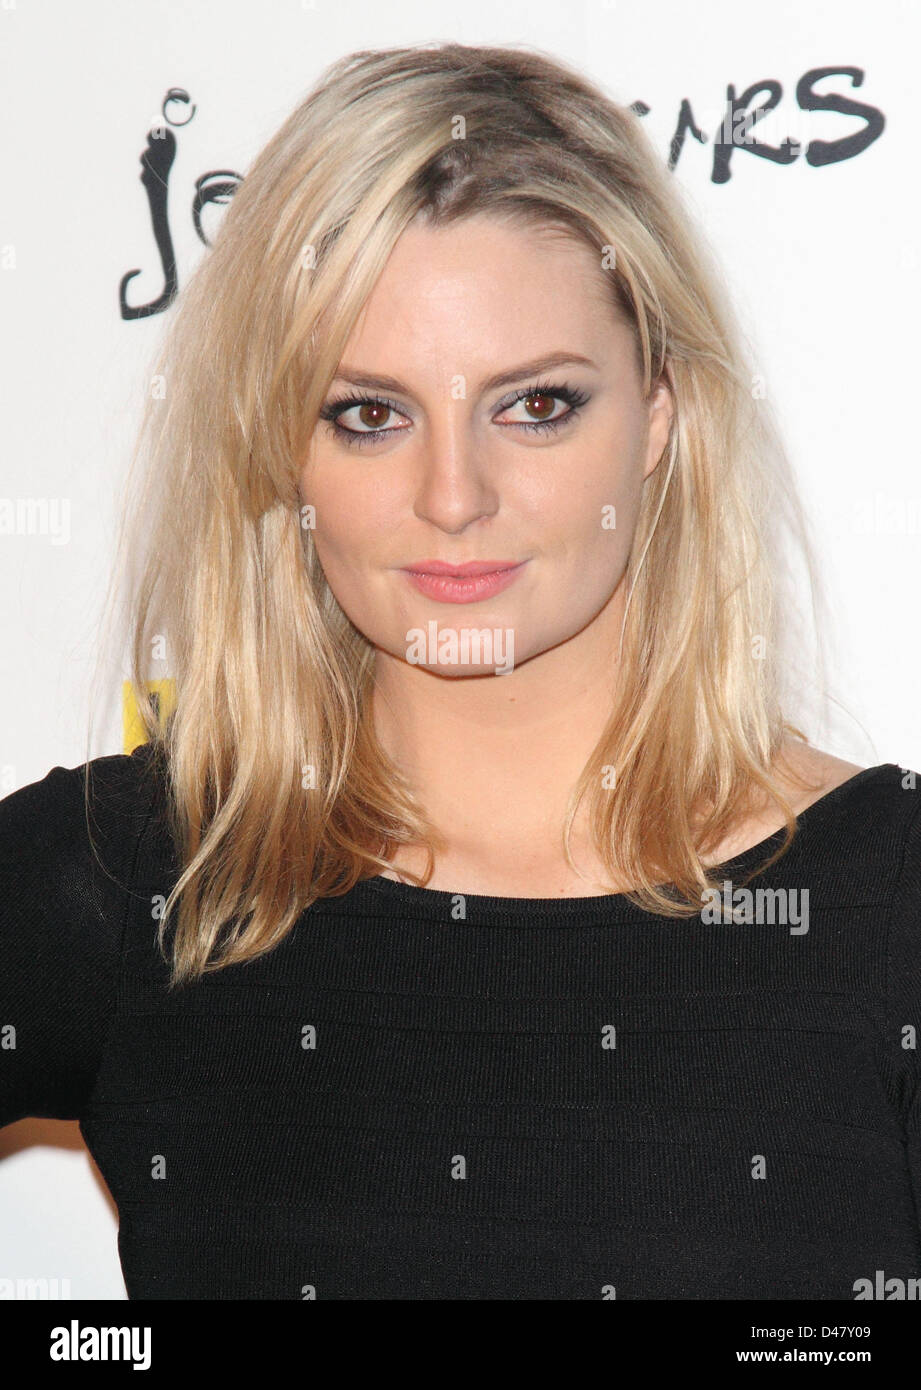 London, UK. March 7th 2013. Morgana Robinson at Loaded Laftas Comedy Awards at Sway Nightclub Covent Garden, London, UK.   Photo by Keith Mayhew/Alamy Live News Stock Photo